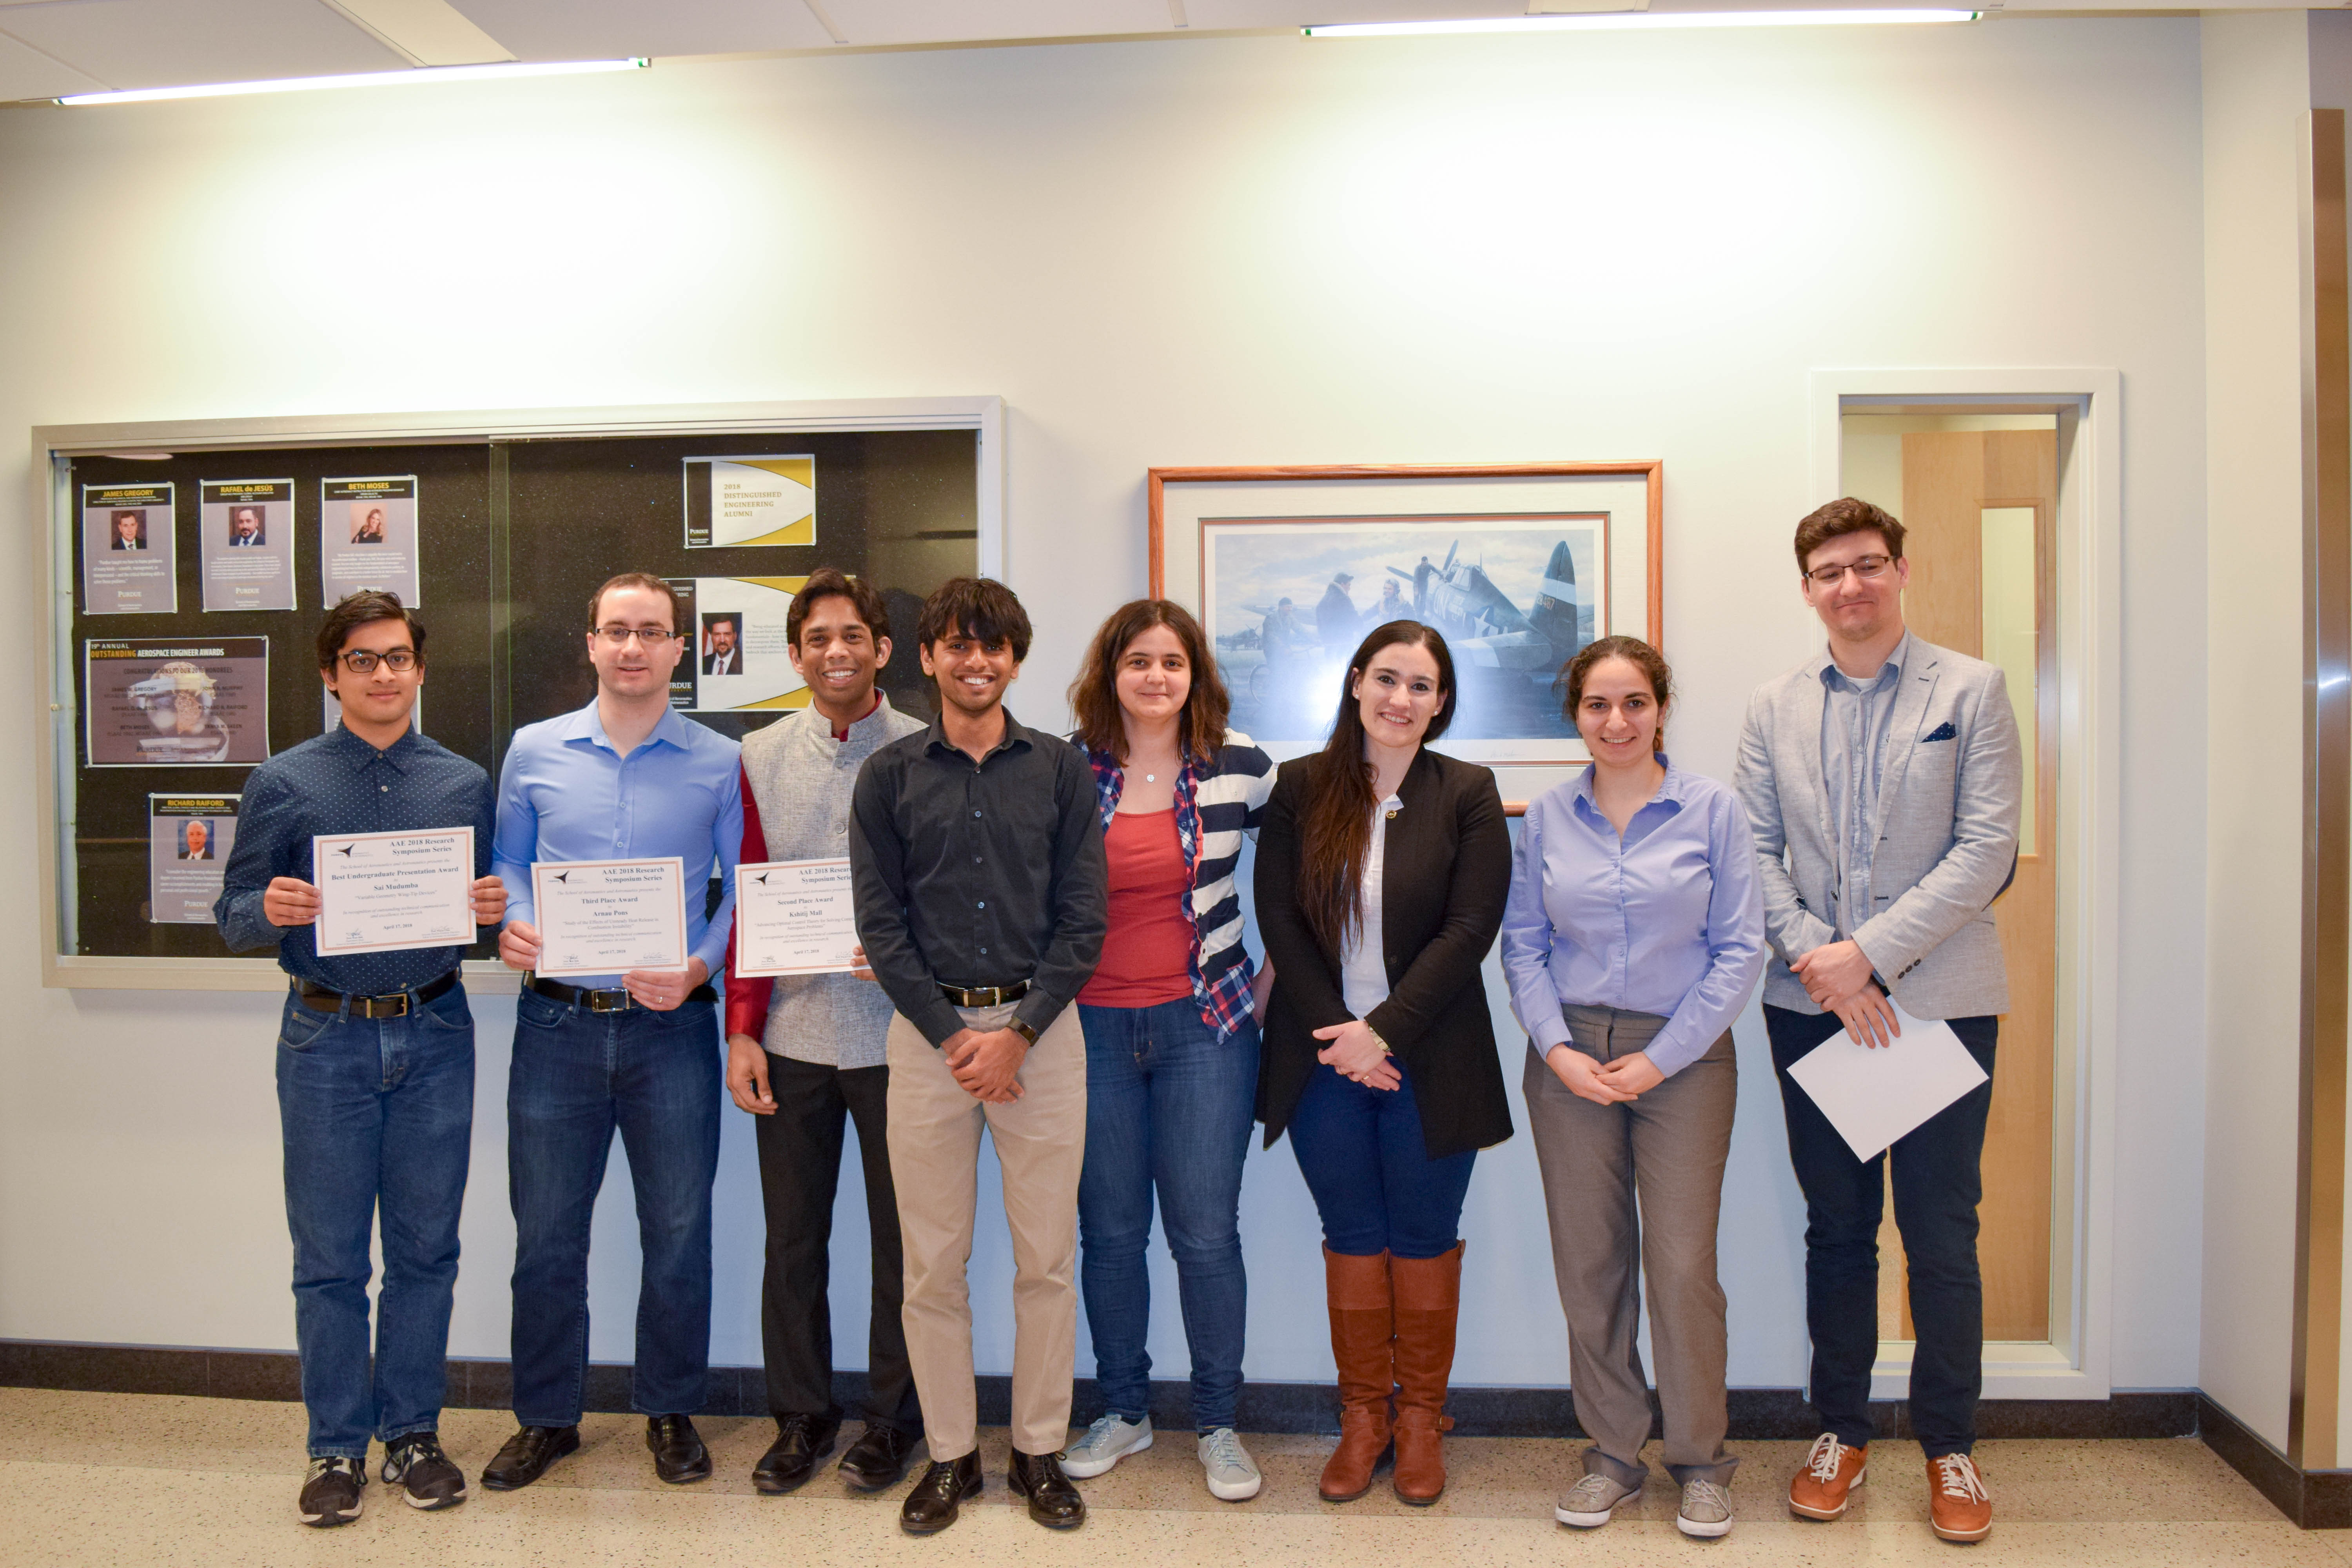 Students winners of the AAE Research Symposium